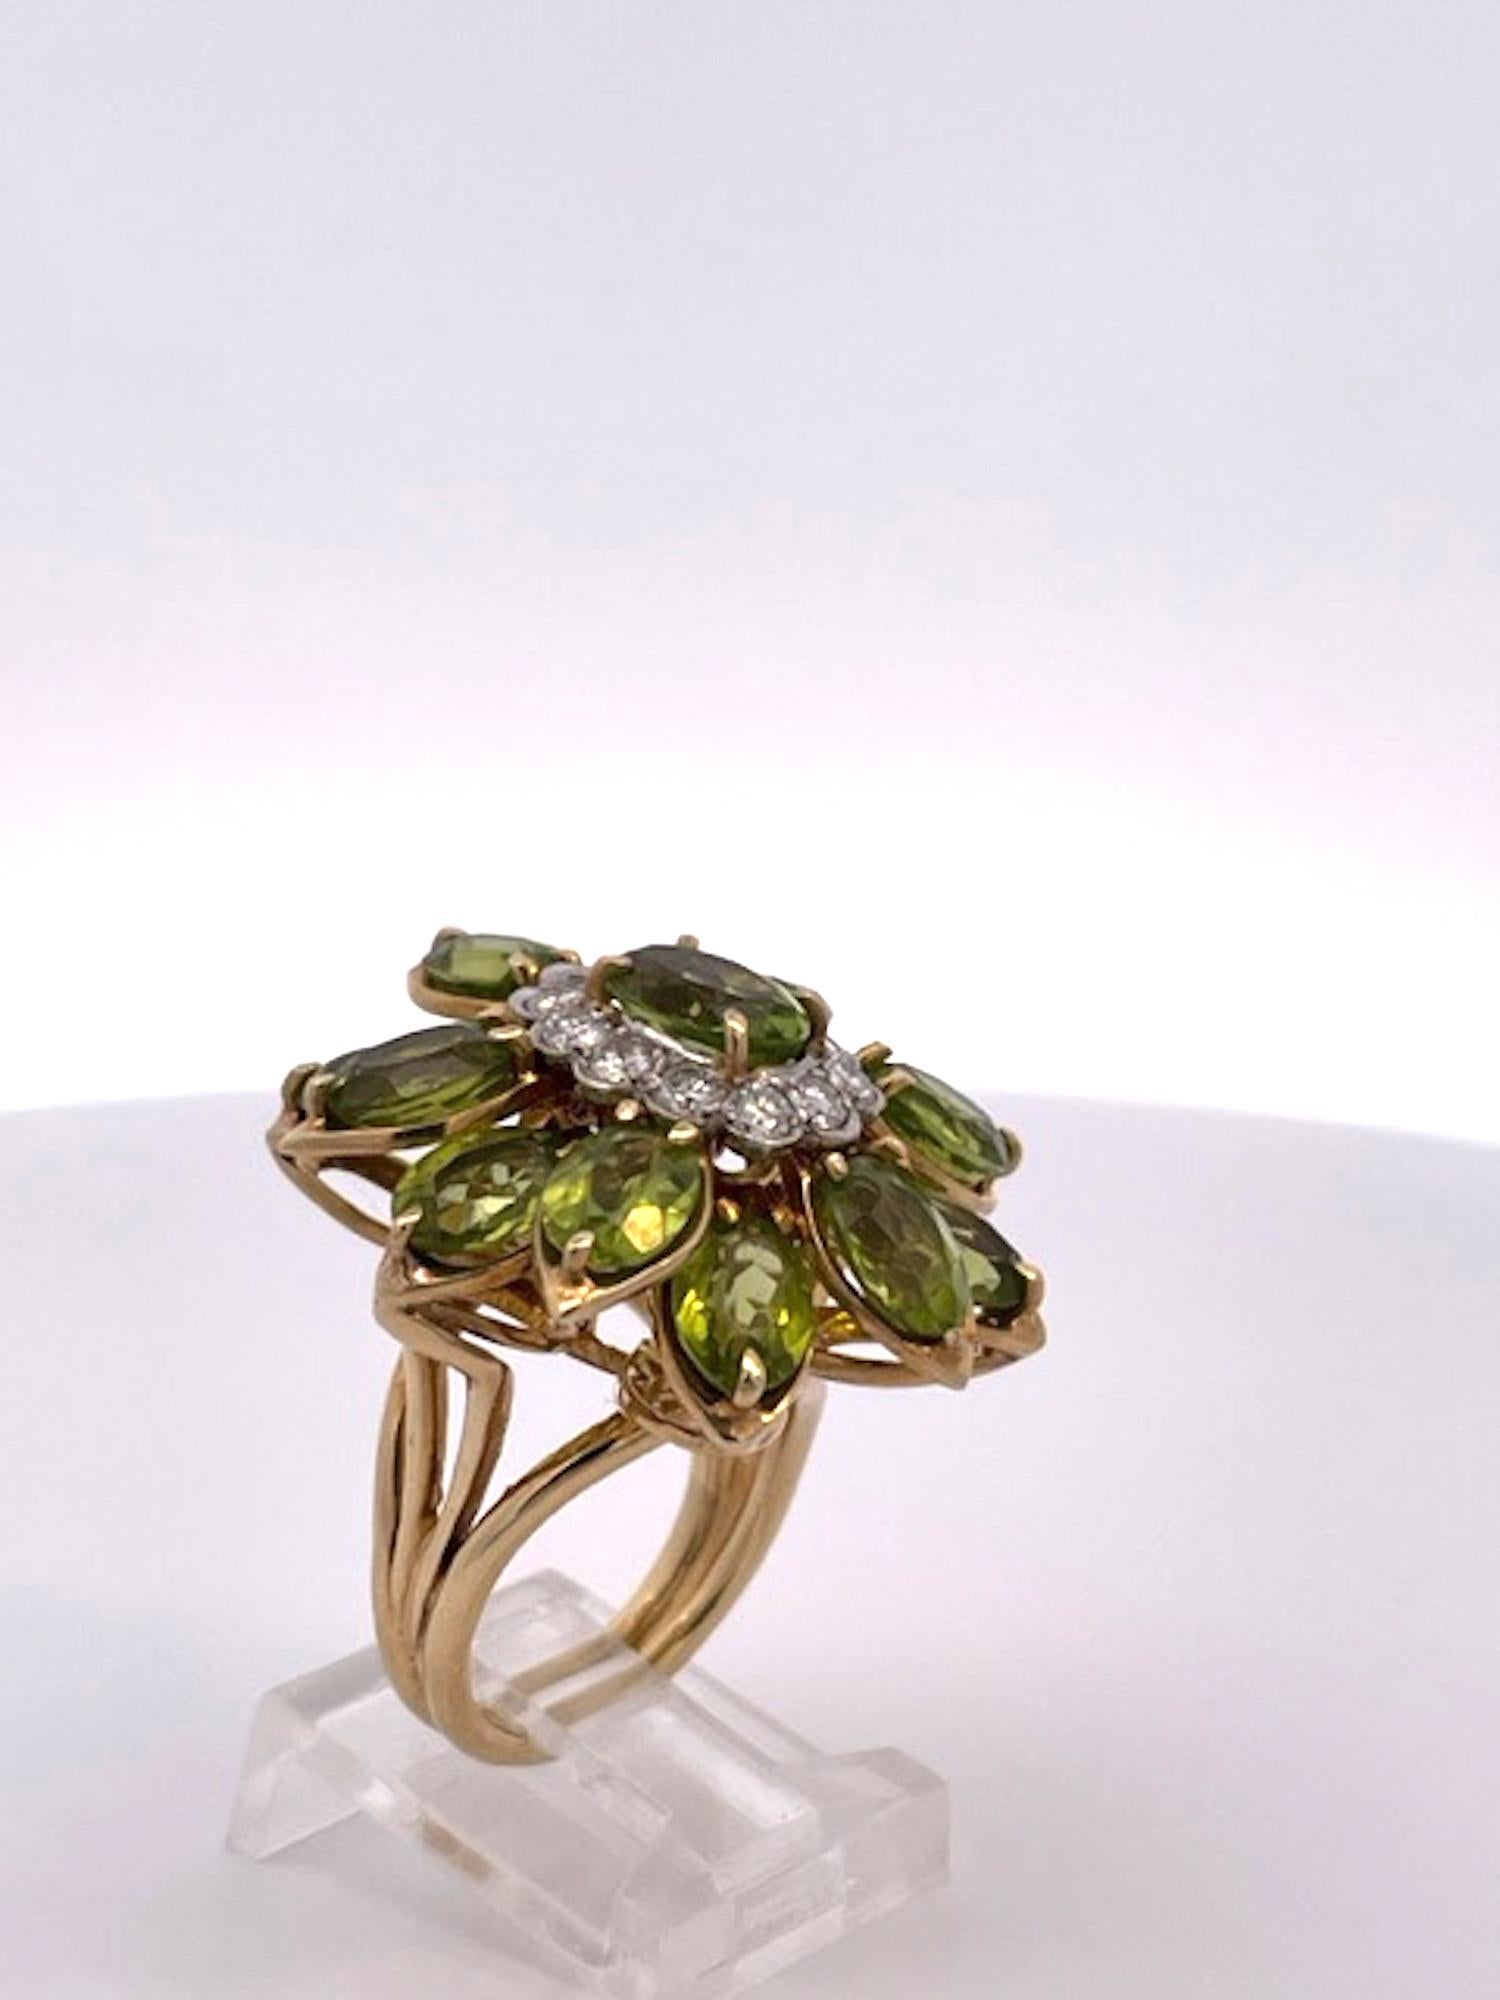 This huge Peridot Diamond Glamour Ring is a magnificent example of a cocktail statement ring. It is made of 14K yellow gold with Marquise cut stones there are 12 stones all approximately 1 carat each to total 12 carats.  There is also a center stone